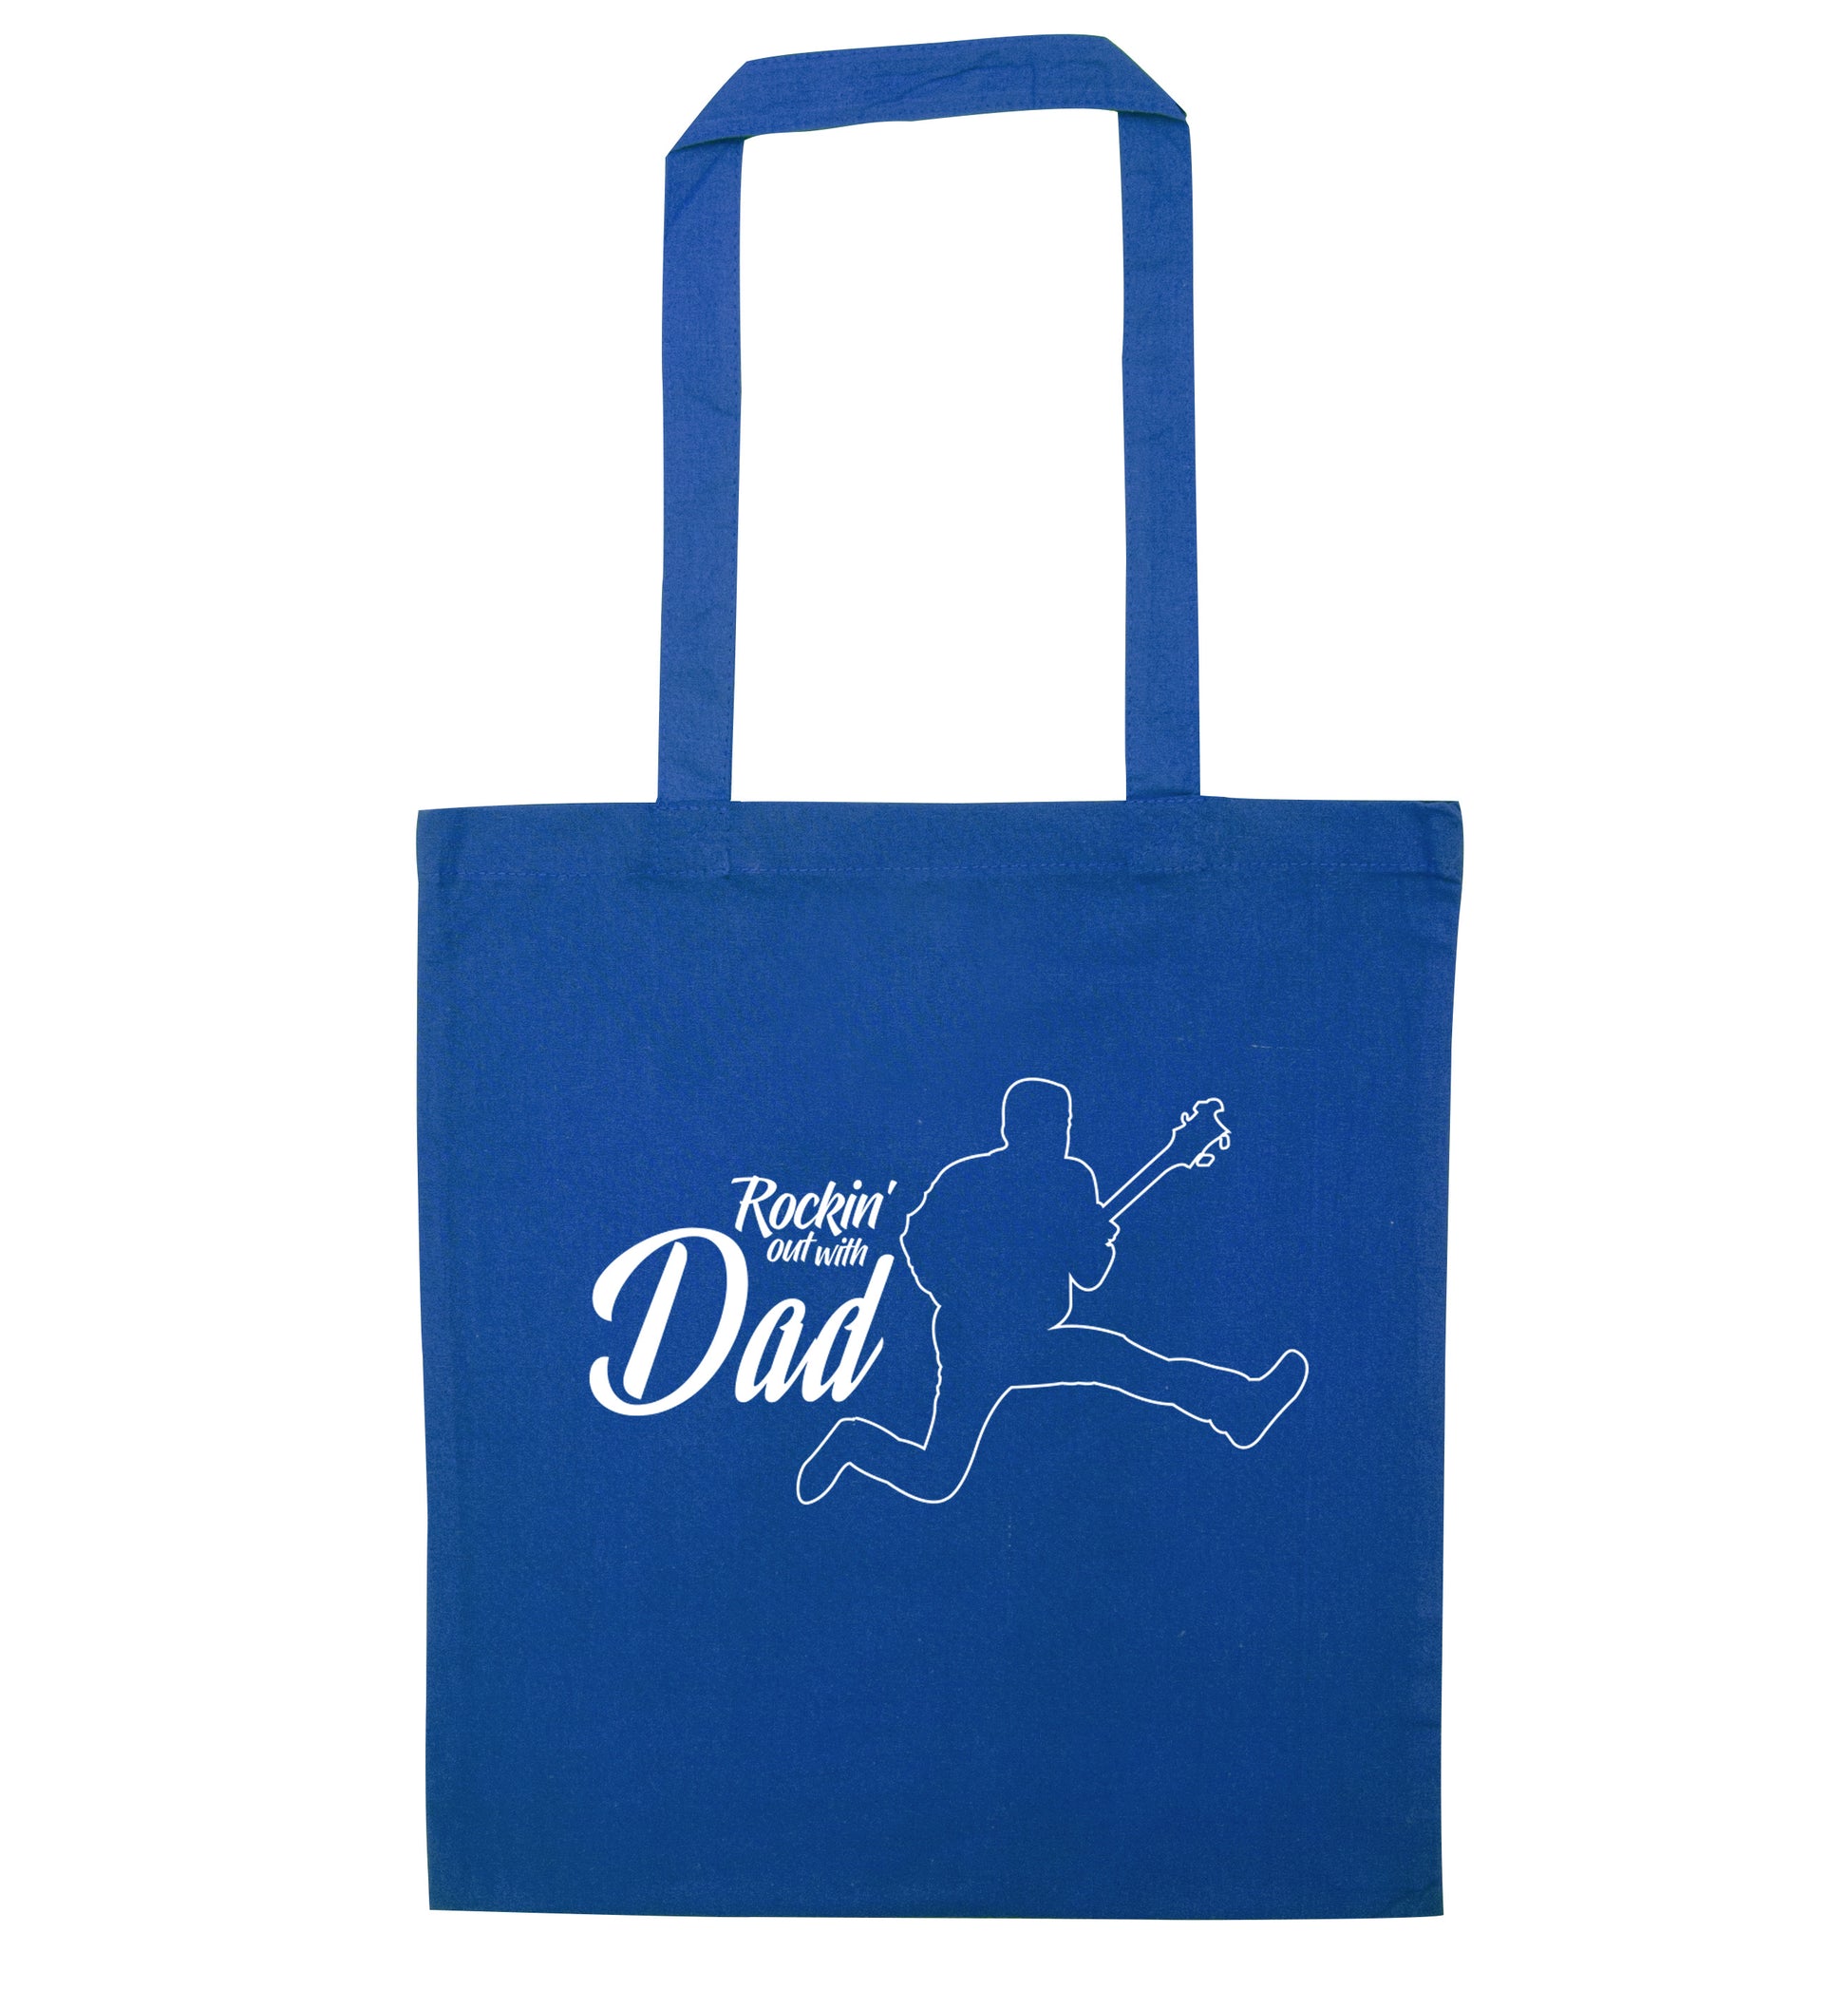 Rockin out with dad blue tote bag